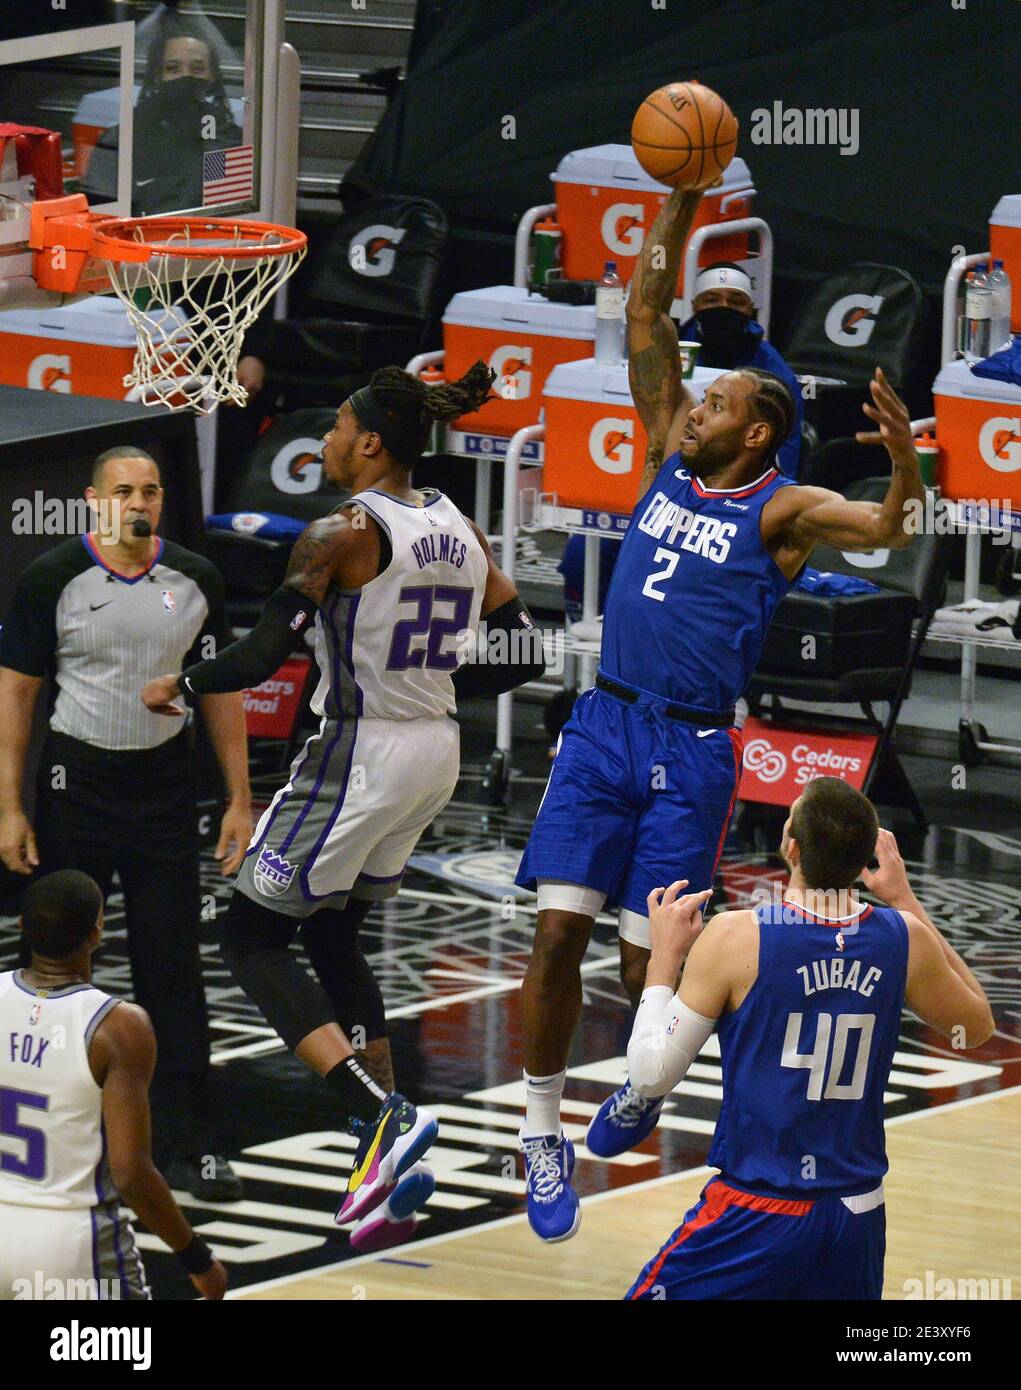 Los Angeles, United States. 20th Jan, 2021. Los Angeles Clippers' forward Kawhi Leonard jams for two points against the Sacramento Kings' during the first quarter at Staples Center in Los Angeles on Wednesday, January 20, 2021. The Clippers defeated the Kings 115-96. Photo by Jim Ruymen/UPI Credit: UPI/Alamy Live News Stock Photo